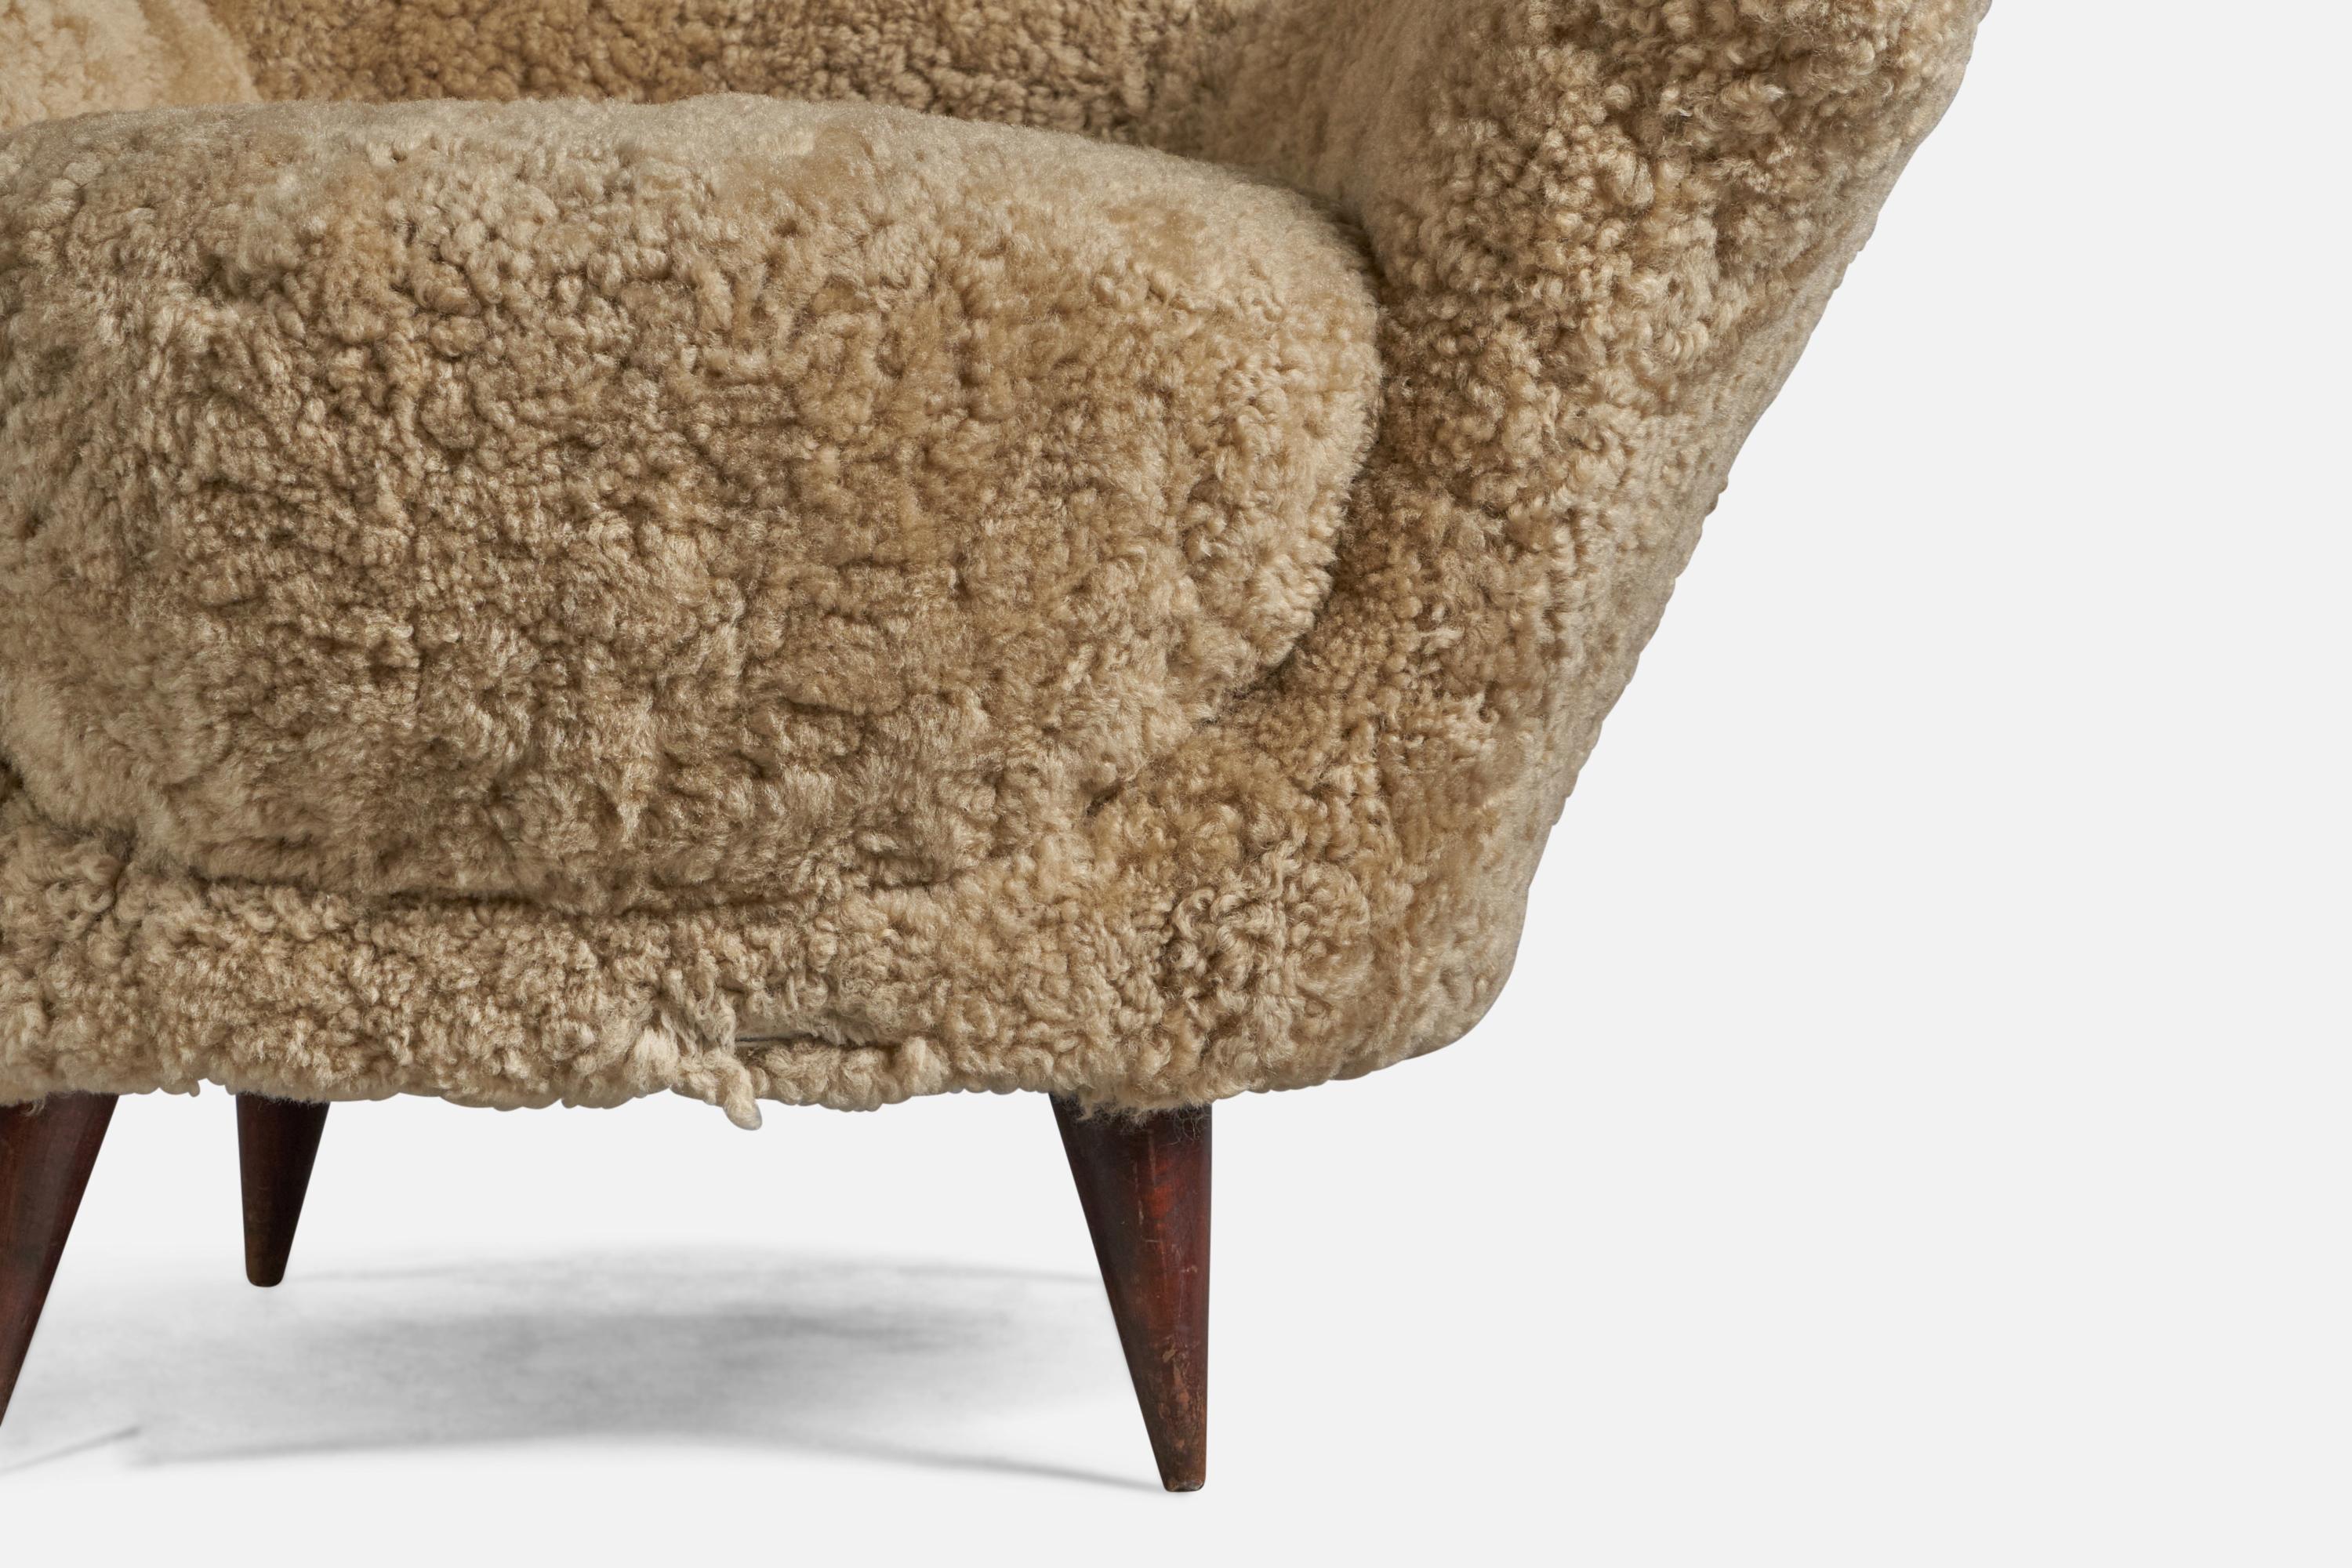 Mid-20th Century Maurizio Tempestini Attribution, Lounge Chairs, Wood, Shearling, Italy, 1940s For Sale